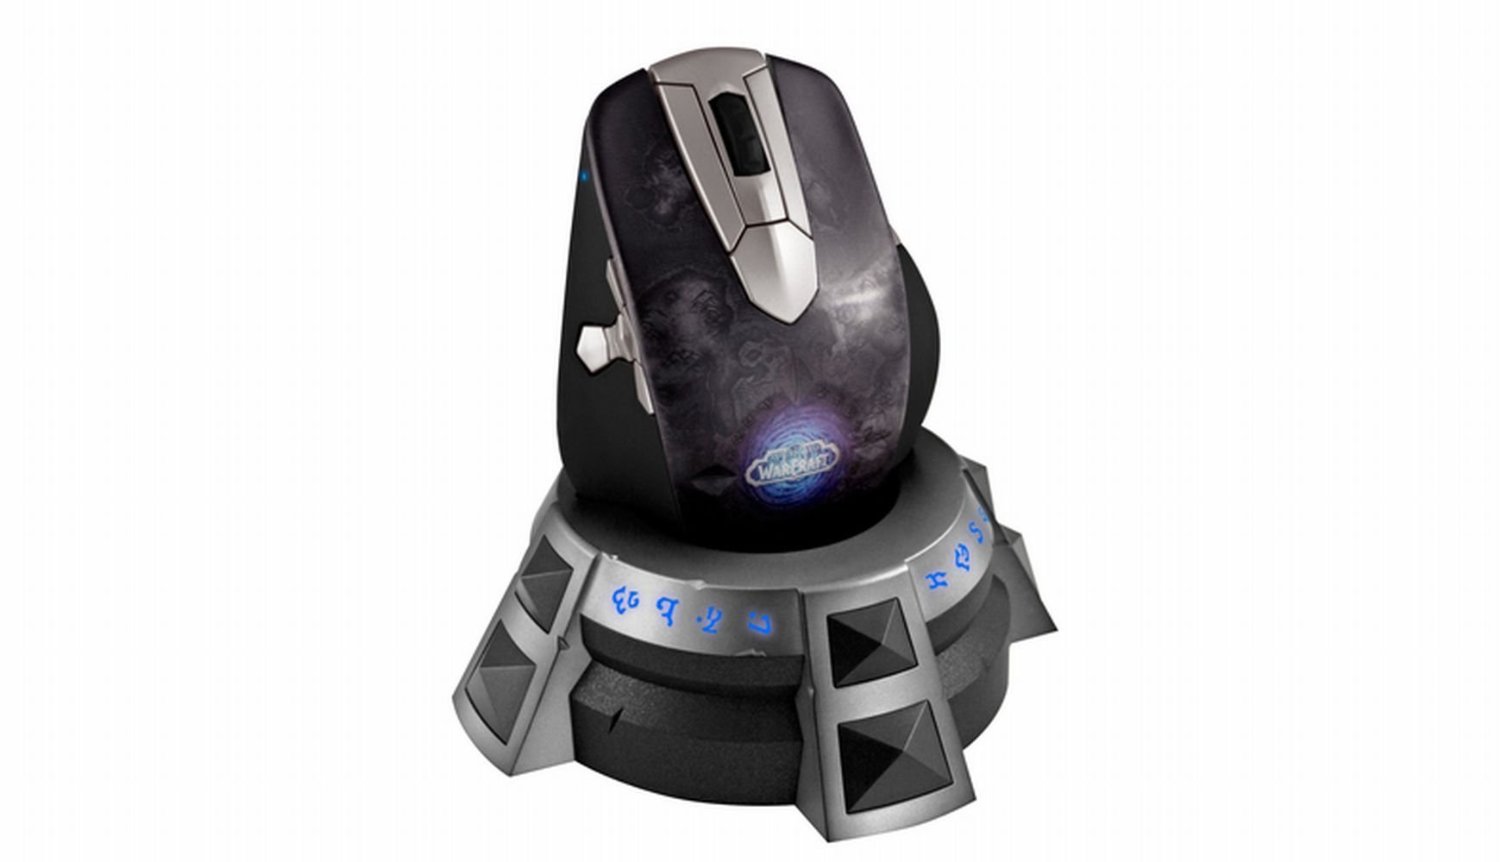 Blizzplanet Review – SteelSeries World of Warcraft MMO Wireless Gaming Mouse